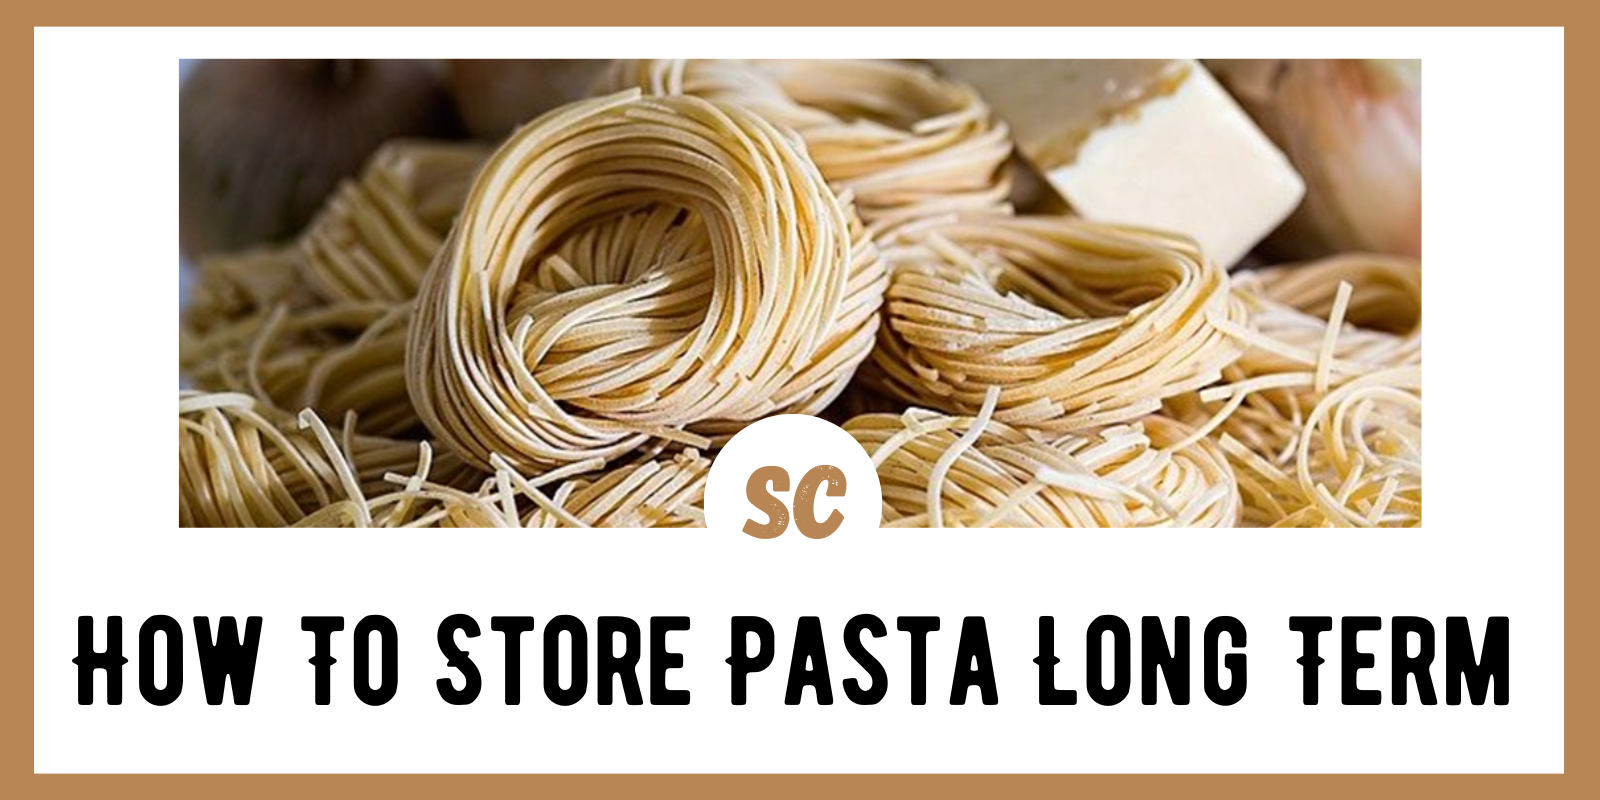 How To Store Pasta Long Term